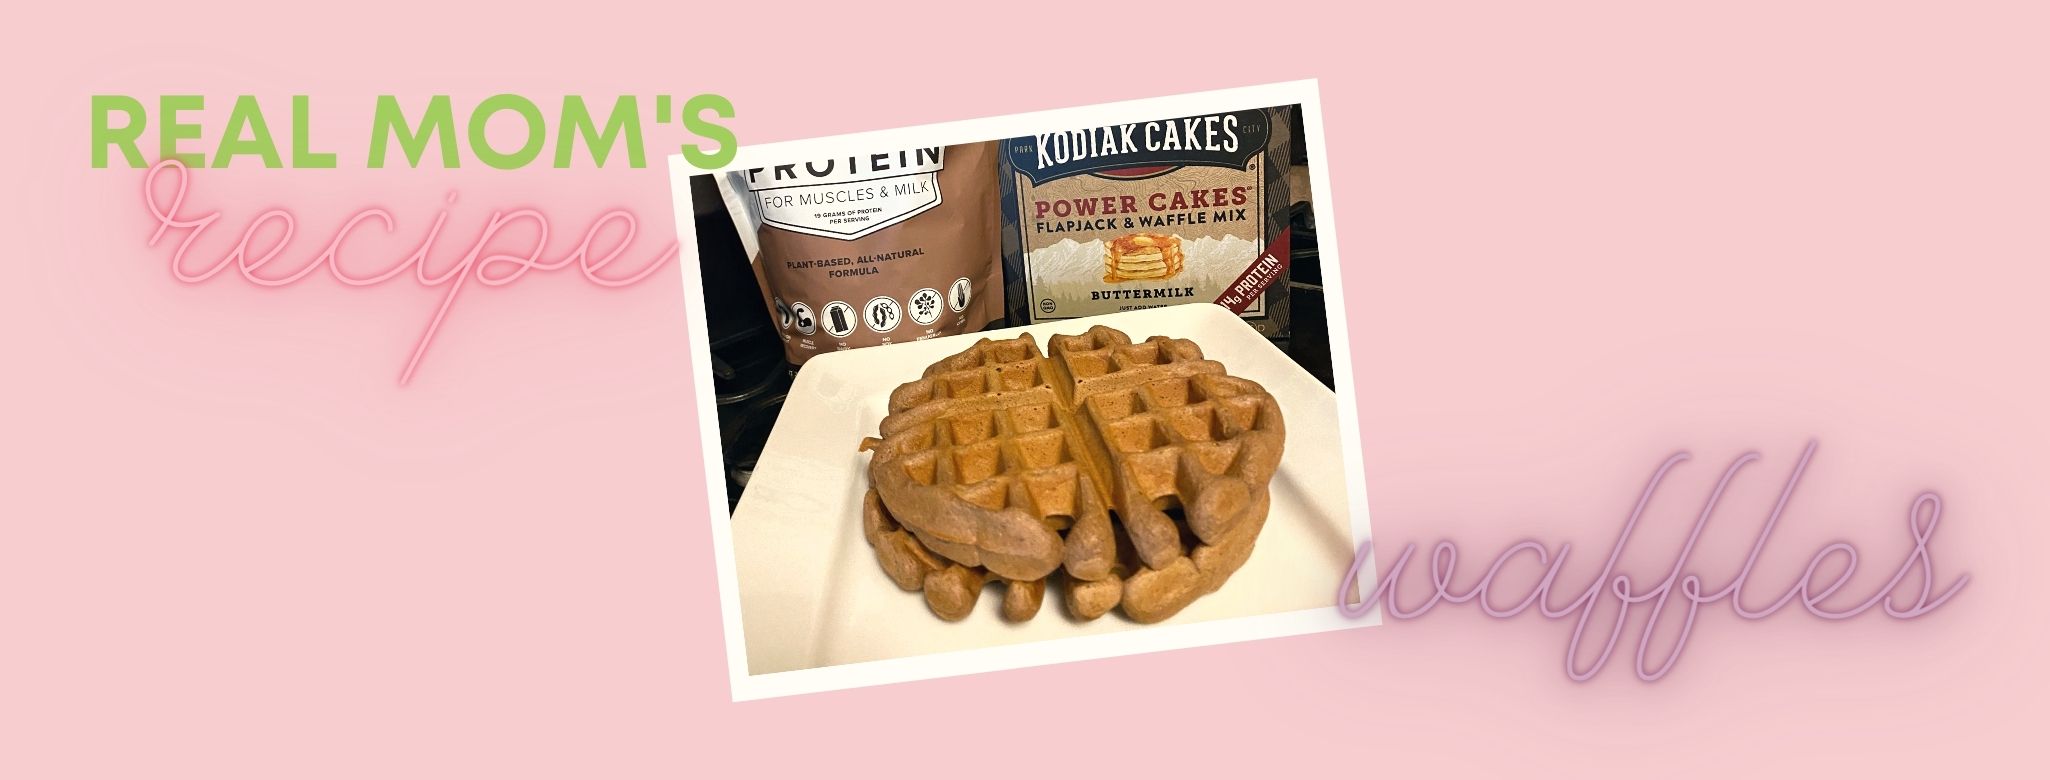 ruth's protein-packed waffle recipe